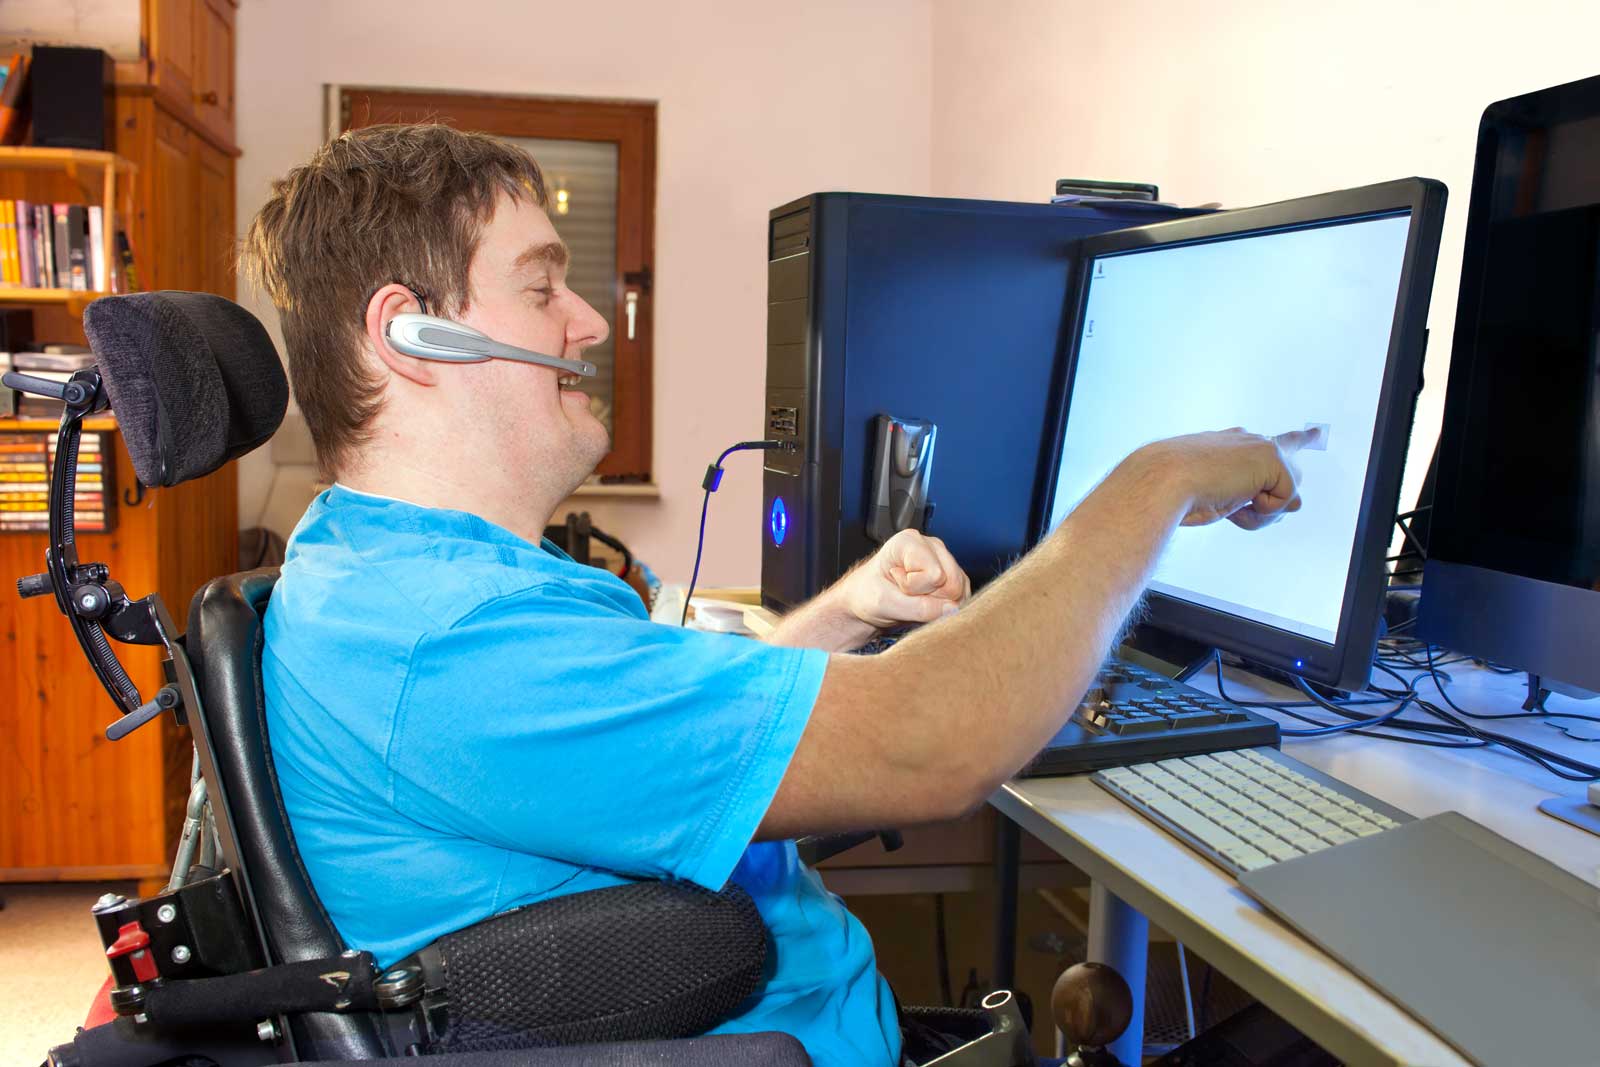 A young man with infantile cerebral palsy caused by a complicated birth sitting in a multifunctional wheelchair using a computer with a wireless headset reaching out to touch the touch screen